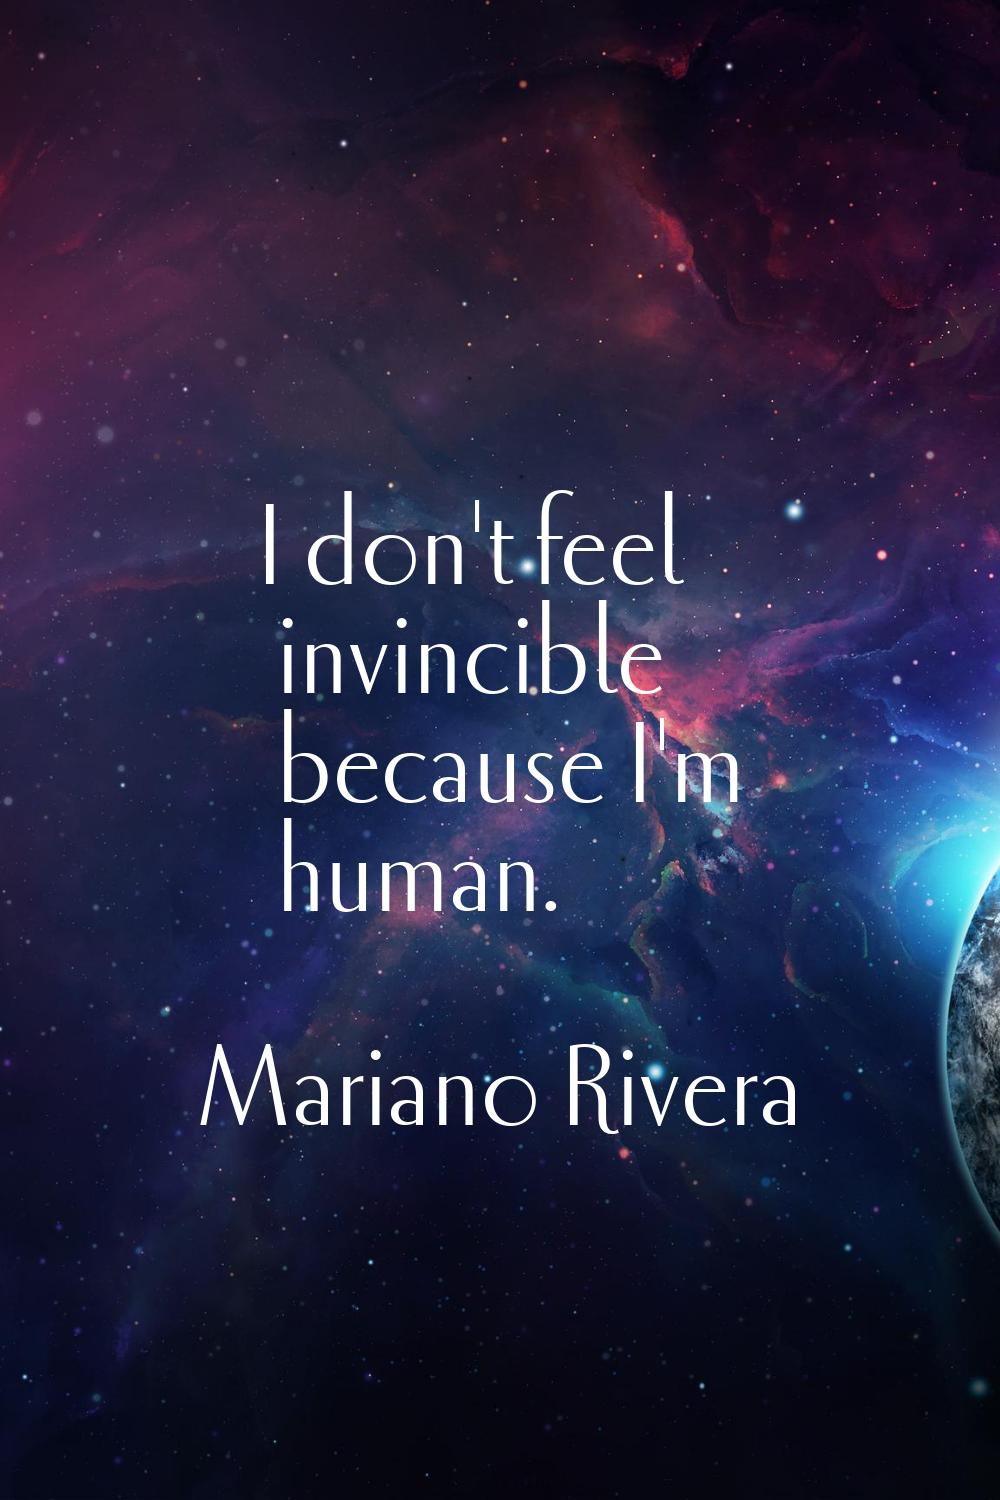 I don't feel invincible because I'm human.